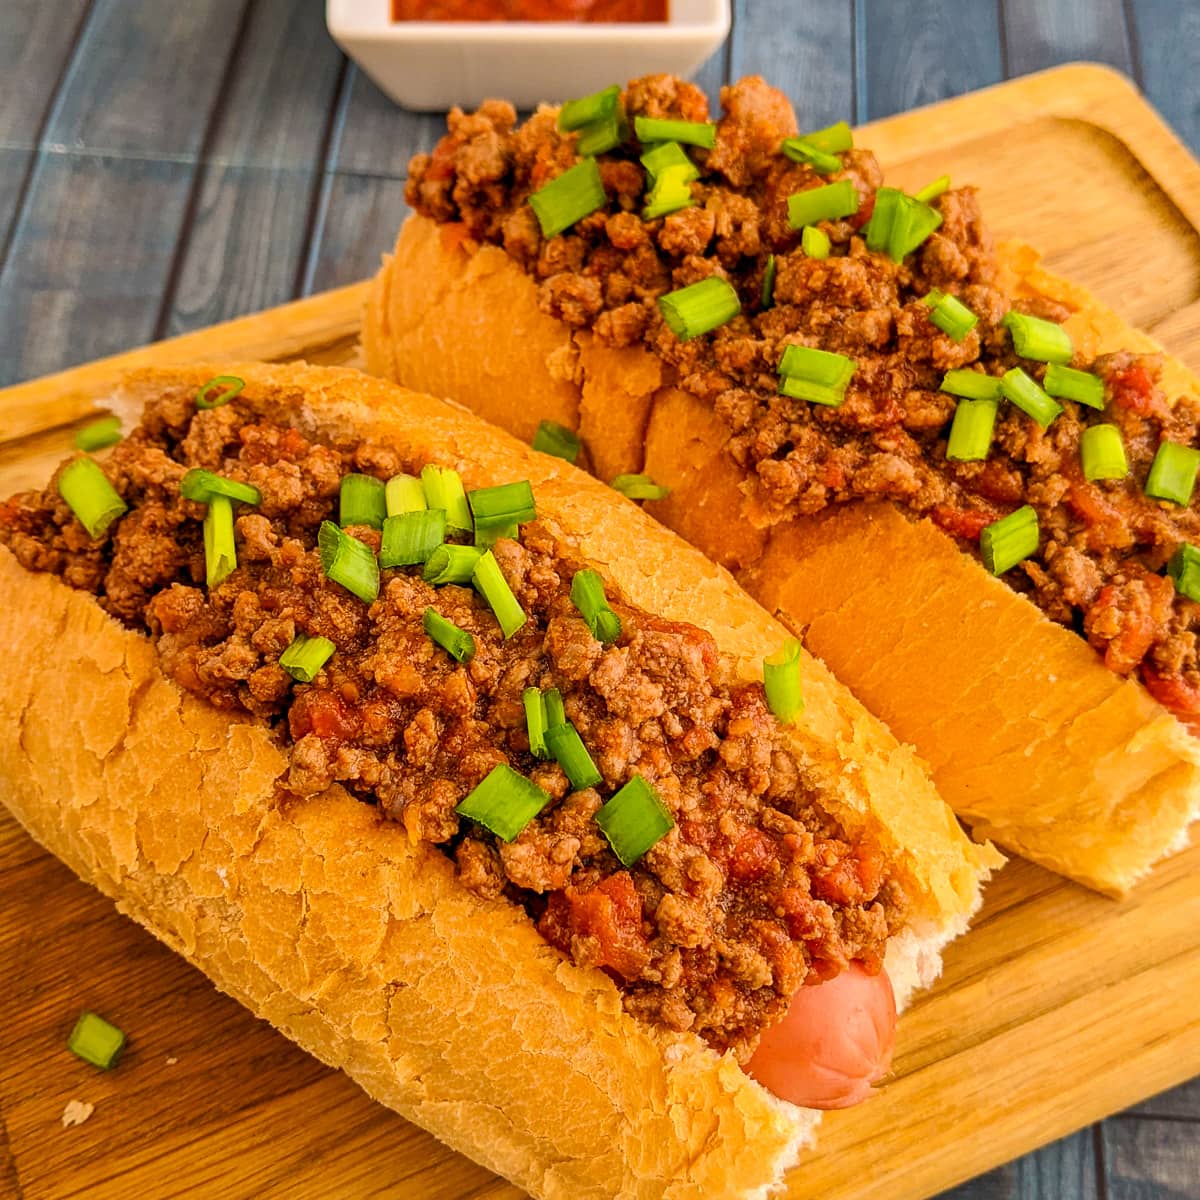 Close look of hot dog with ground beef and green onions.